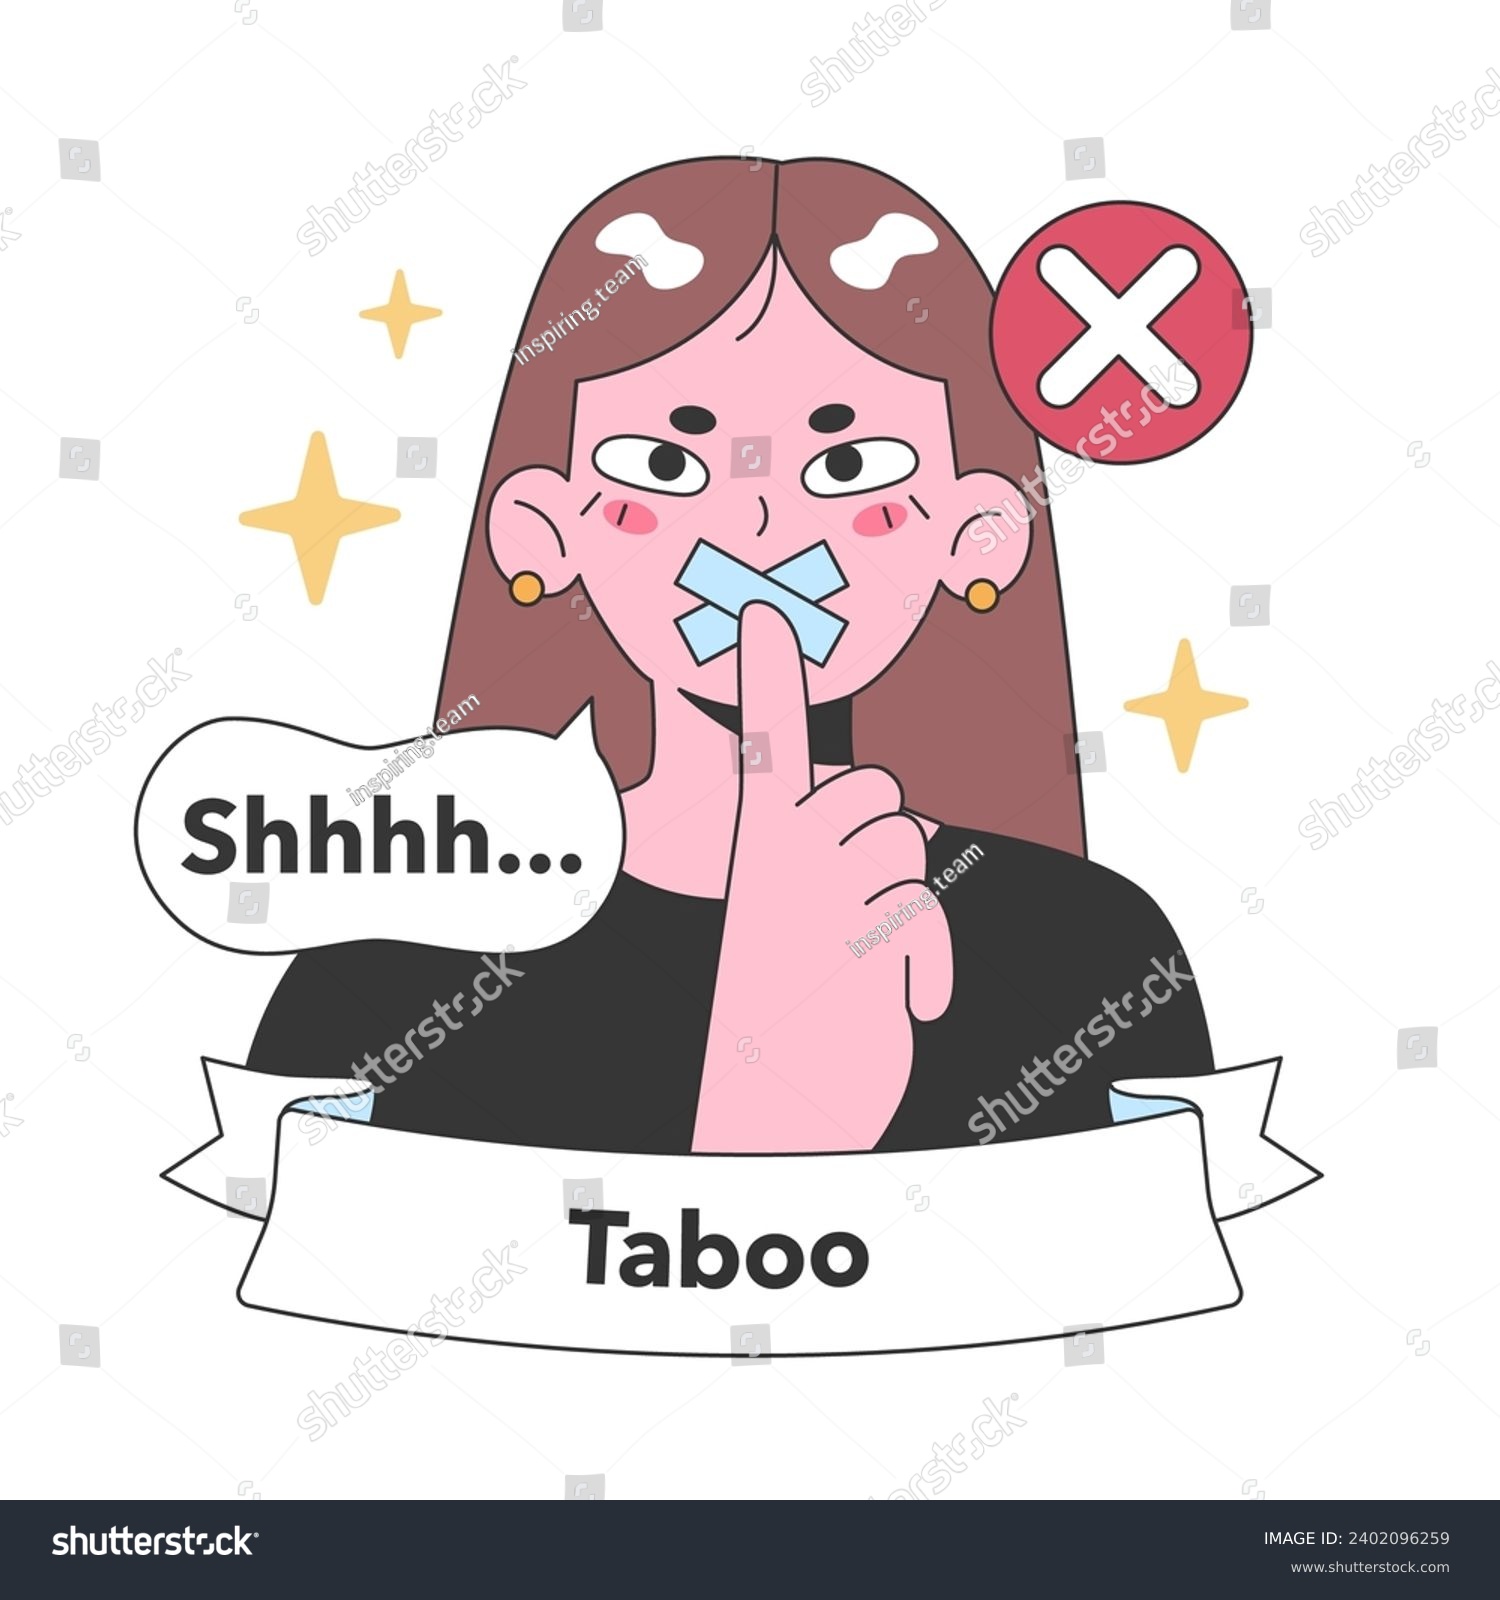 SVG of A silent protest against societal taboos, captured through a hushed figure marked by a bold 'X', embodying quiet resistance. Flat vector illustration. svg